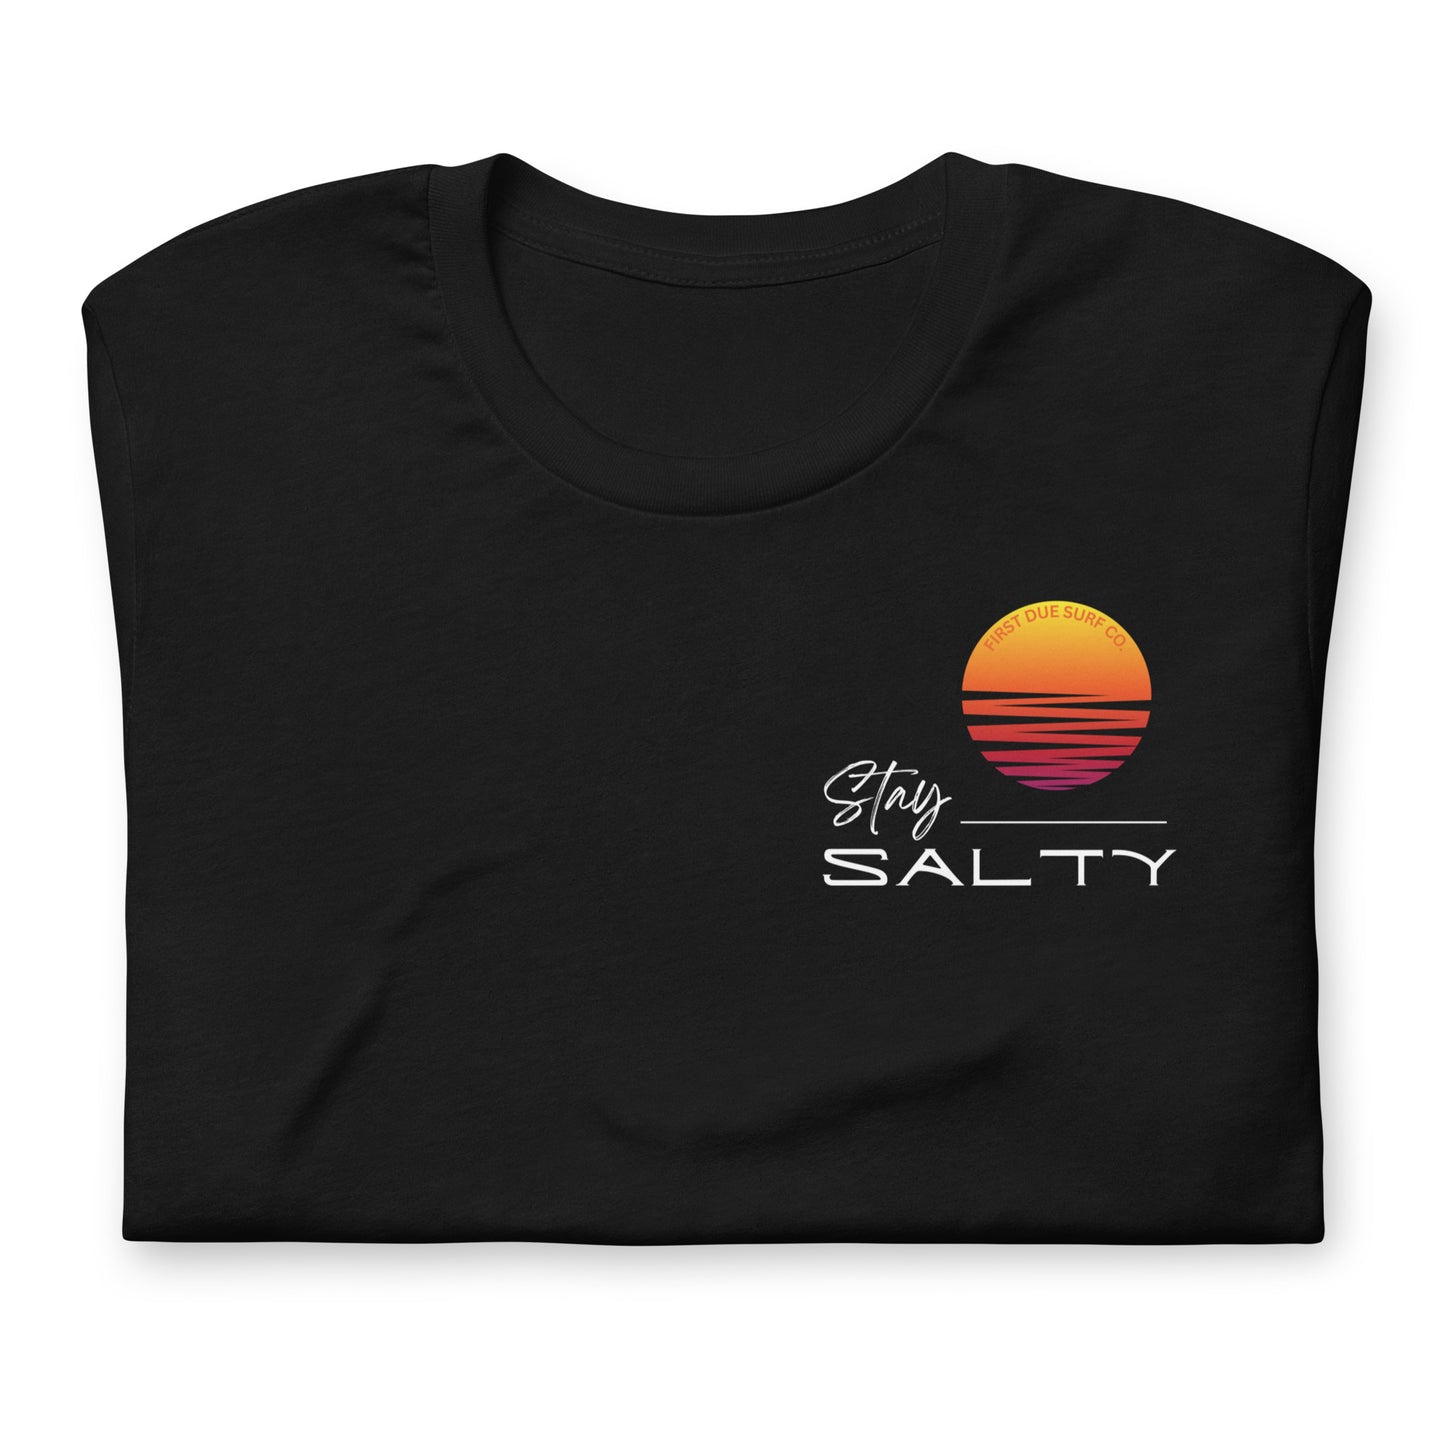 Stay Salty T-shirt - Front Only